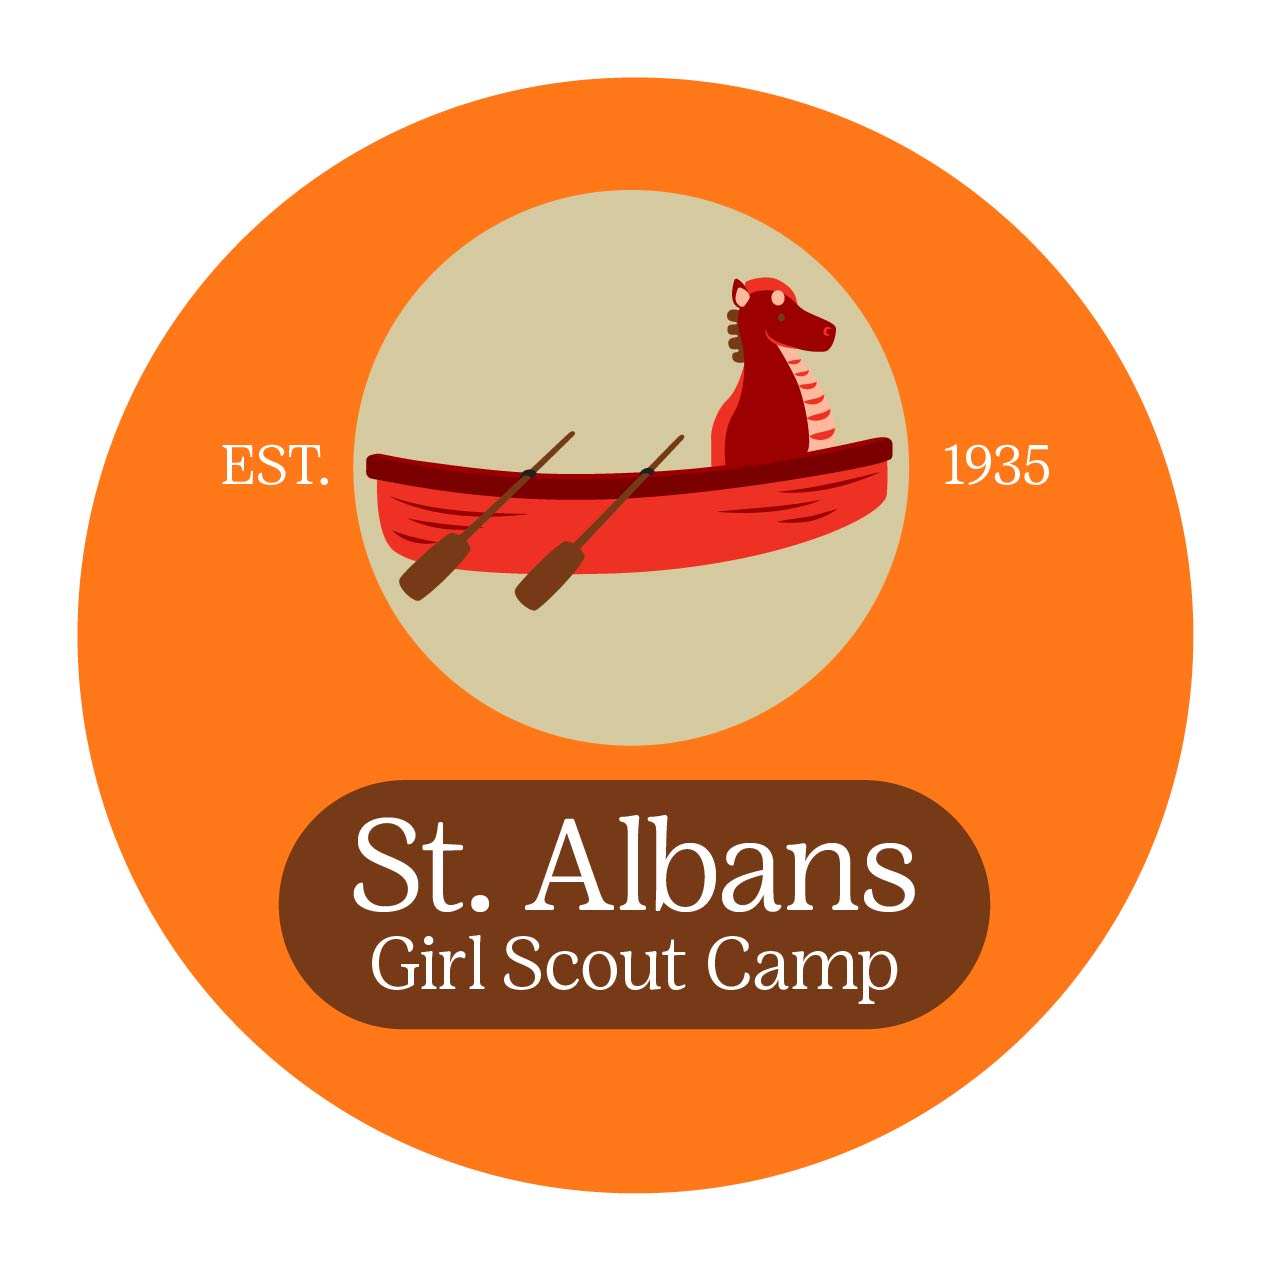 An illustration of a red dragon boat is set against a khaki- and orange-colored circle. White text inside a brown shape reads, "St. Albans Girl Scout Camp. Est. 1935."